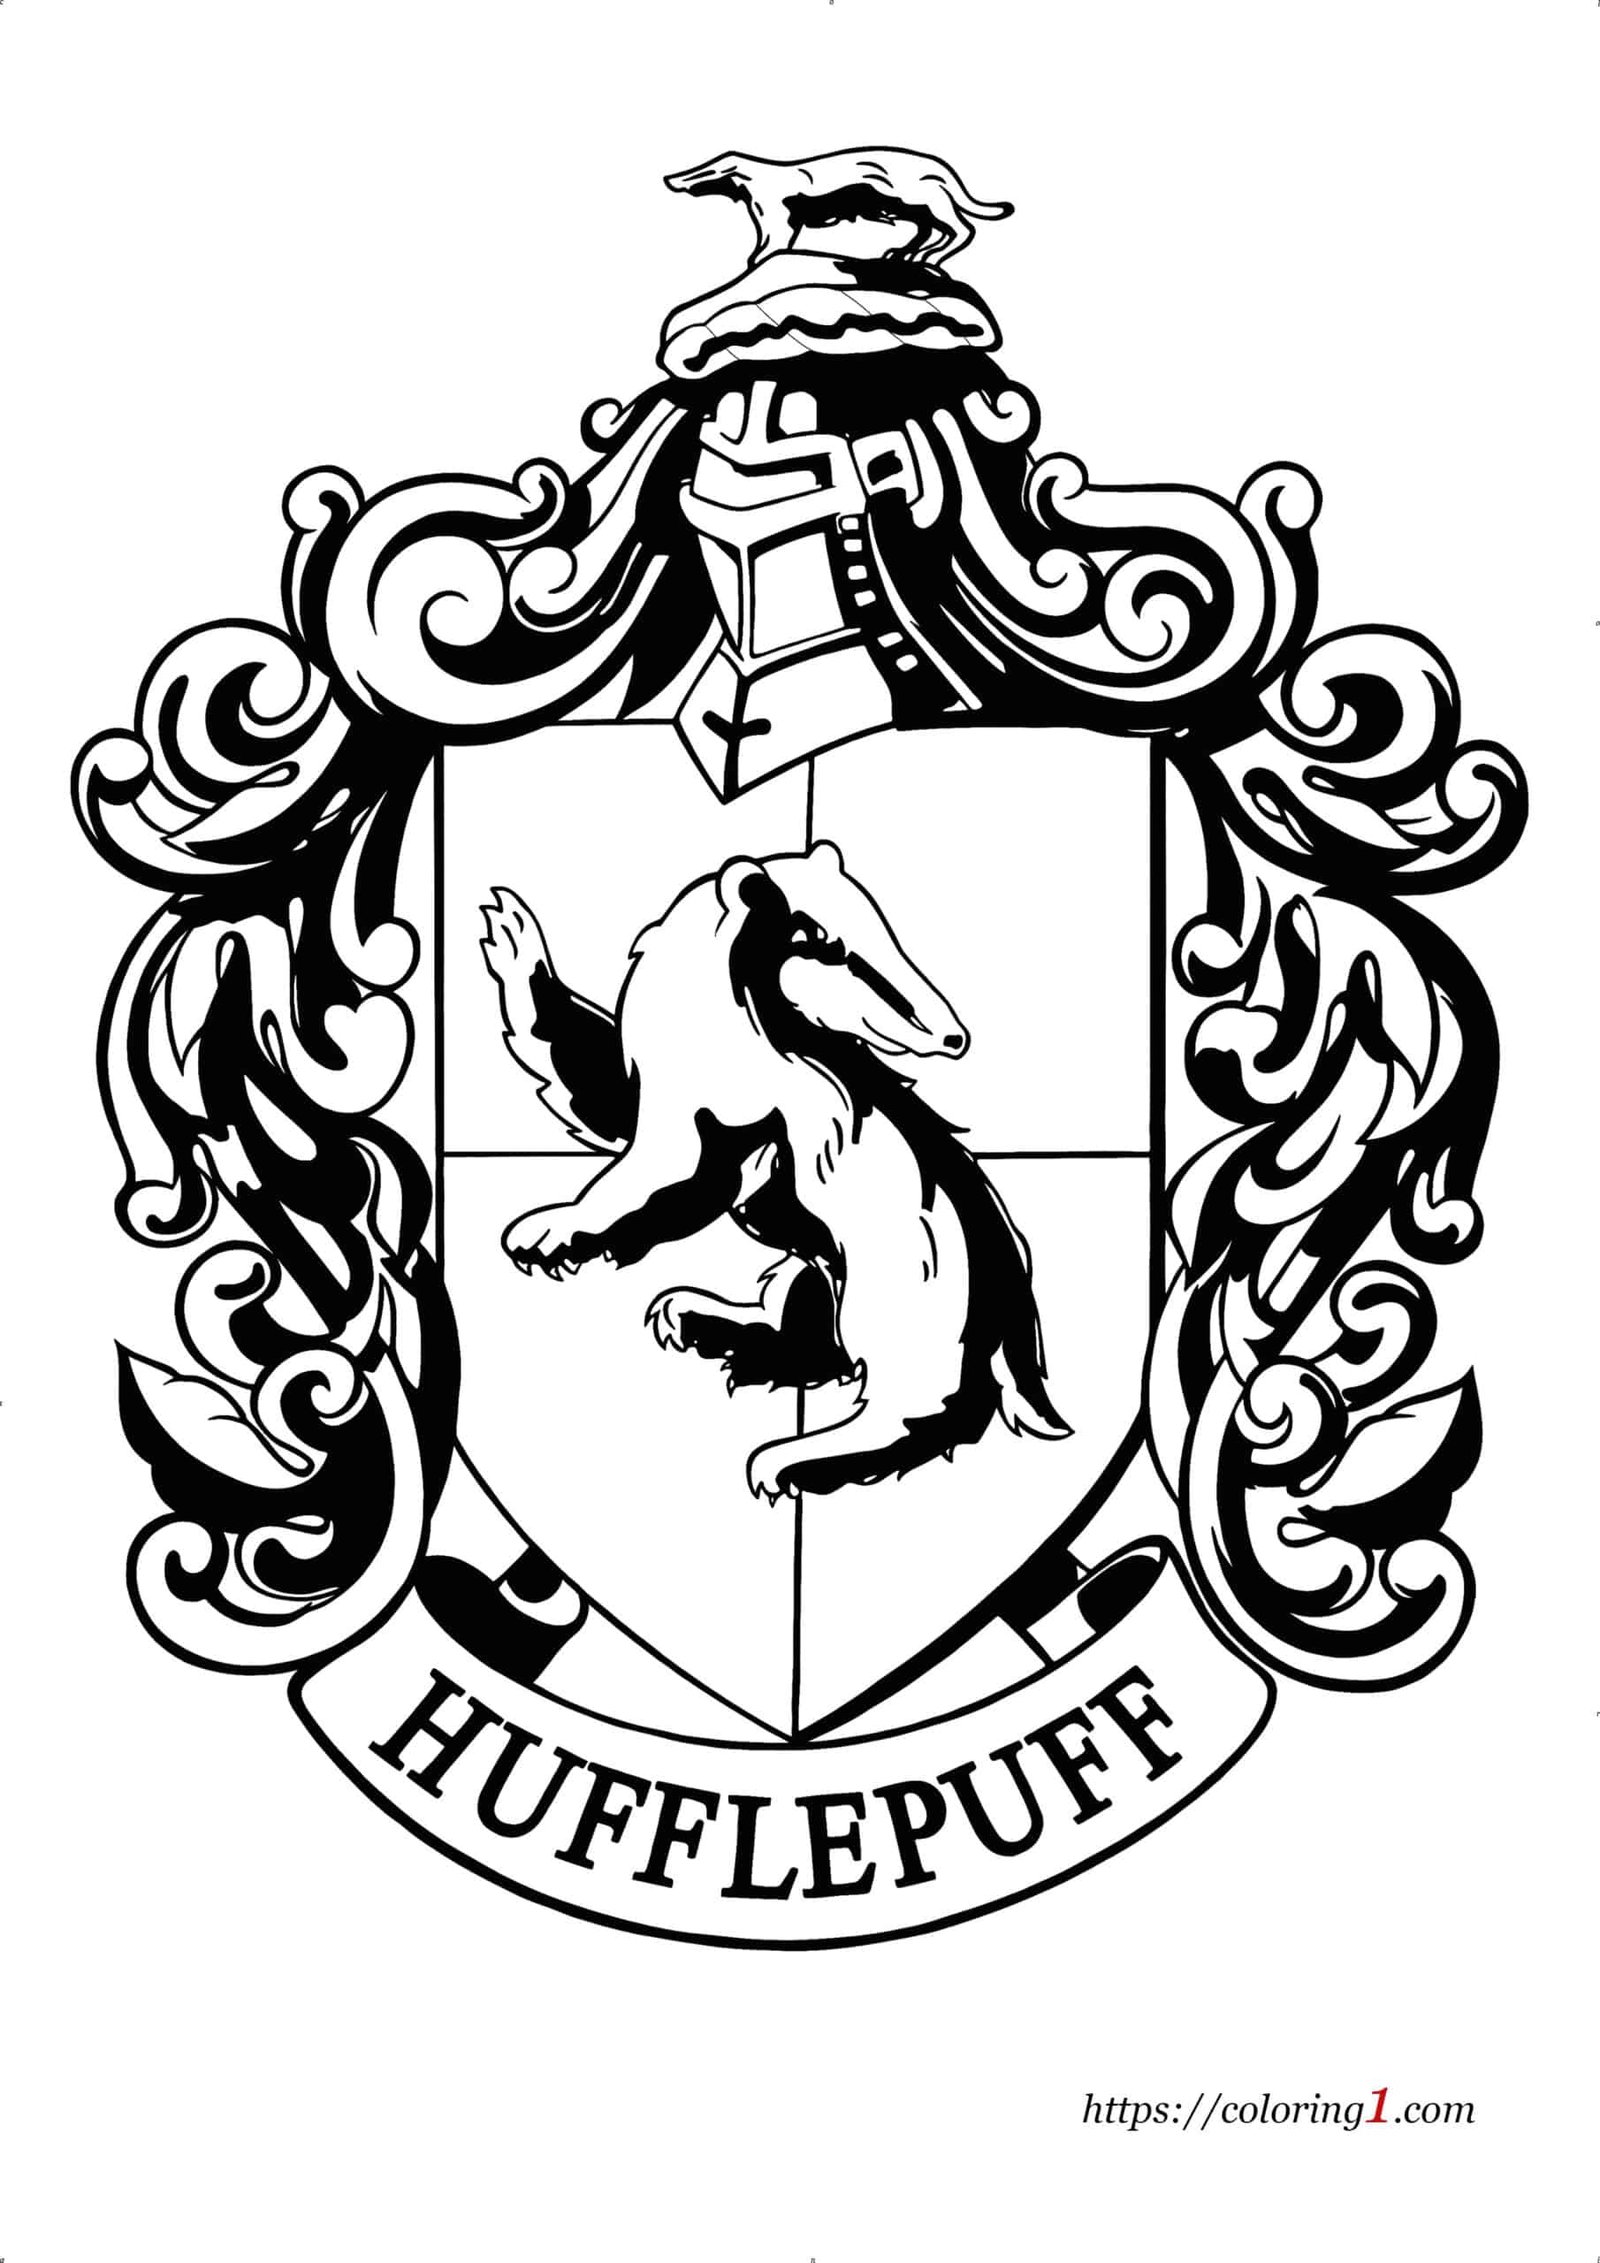 Harry Potter Hufflepuff coloring page